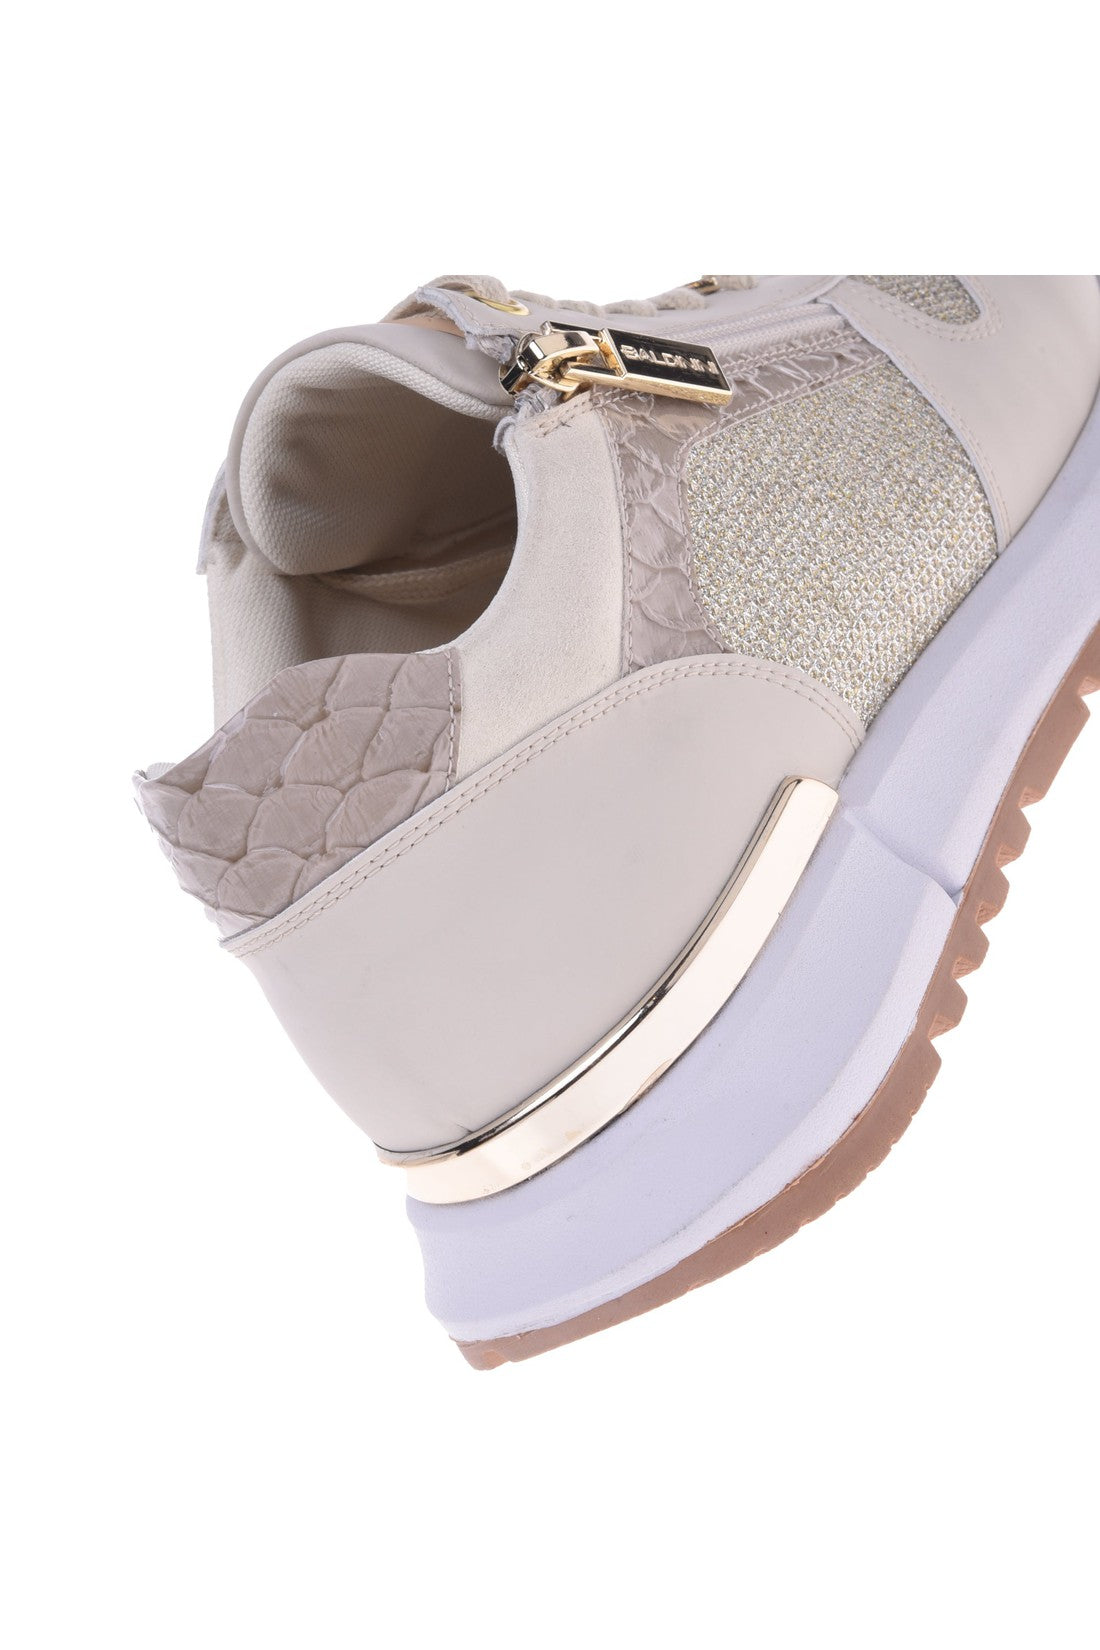 Sneaker in beige and platinum nappa leather and fabric